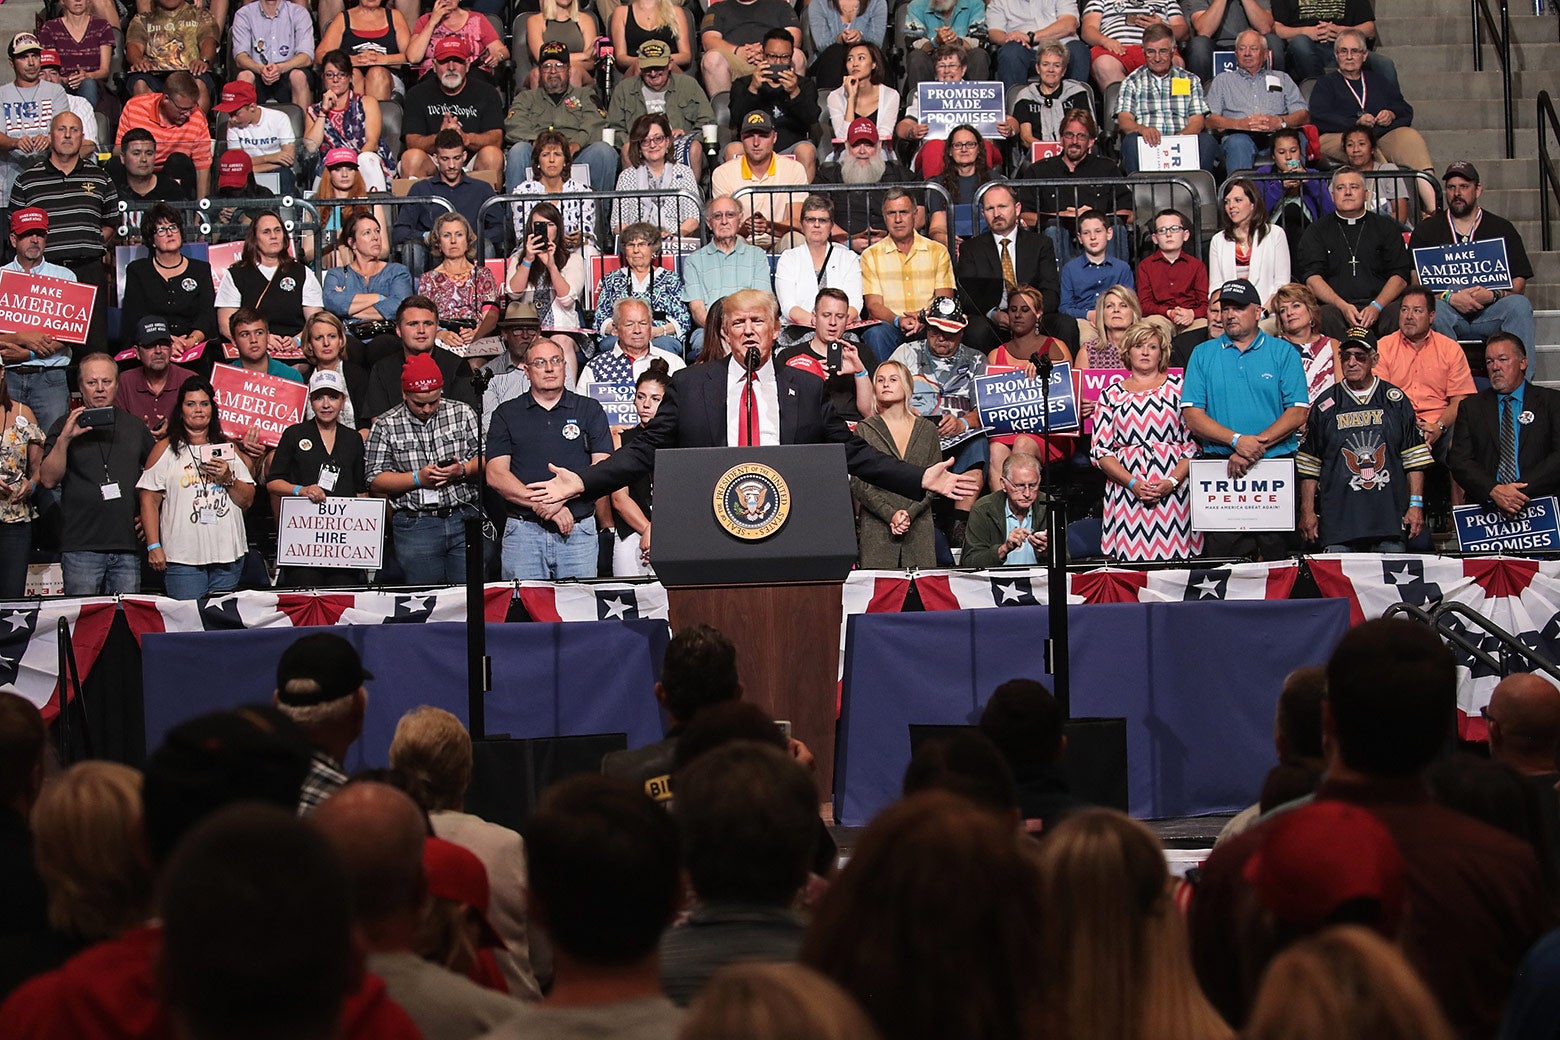 President Donald Trump speaks at a rally on June 21 in Cedar Rapids, Iowa. Trump spoke about renegotiating NAFTA and building a border wall that would produce solar power during the rally.